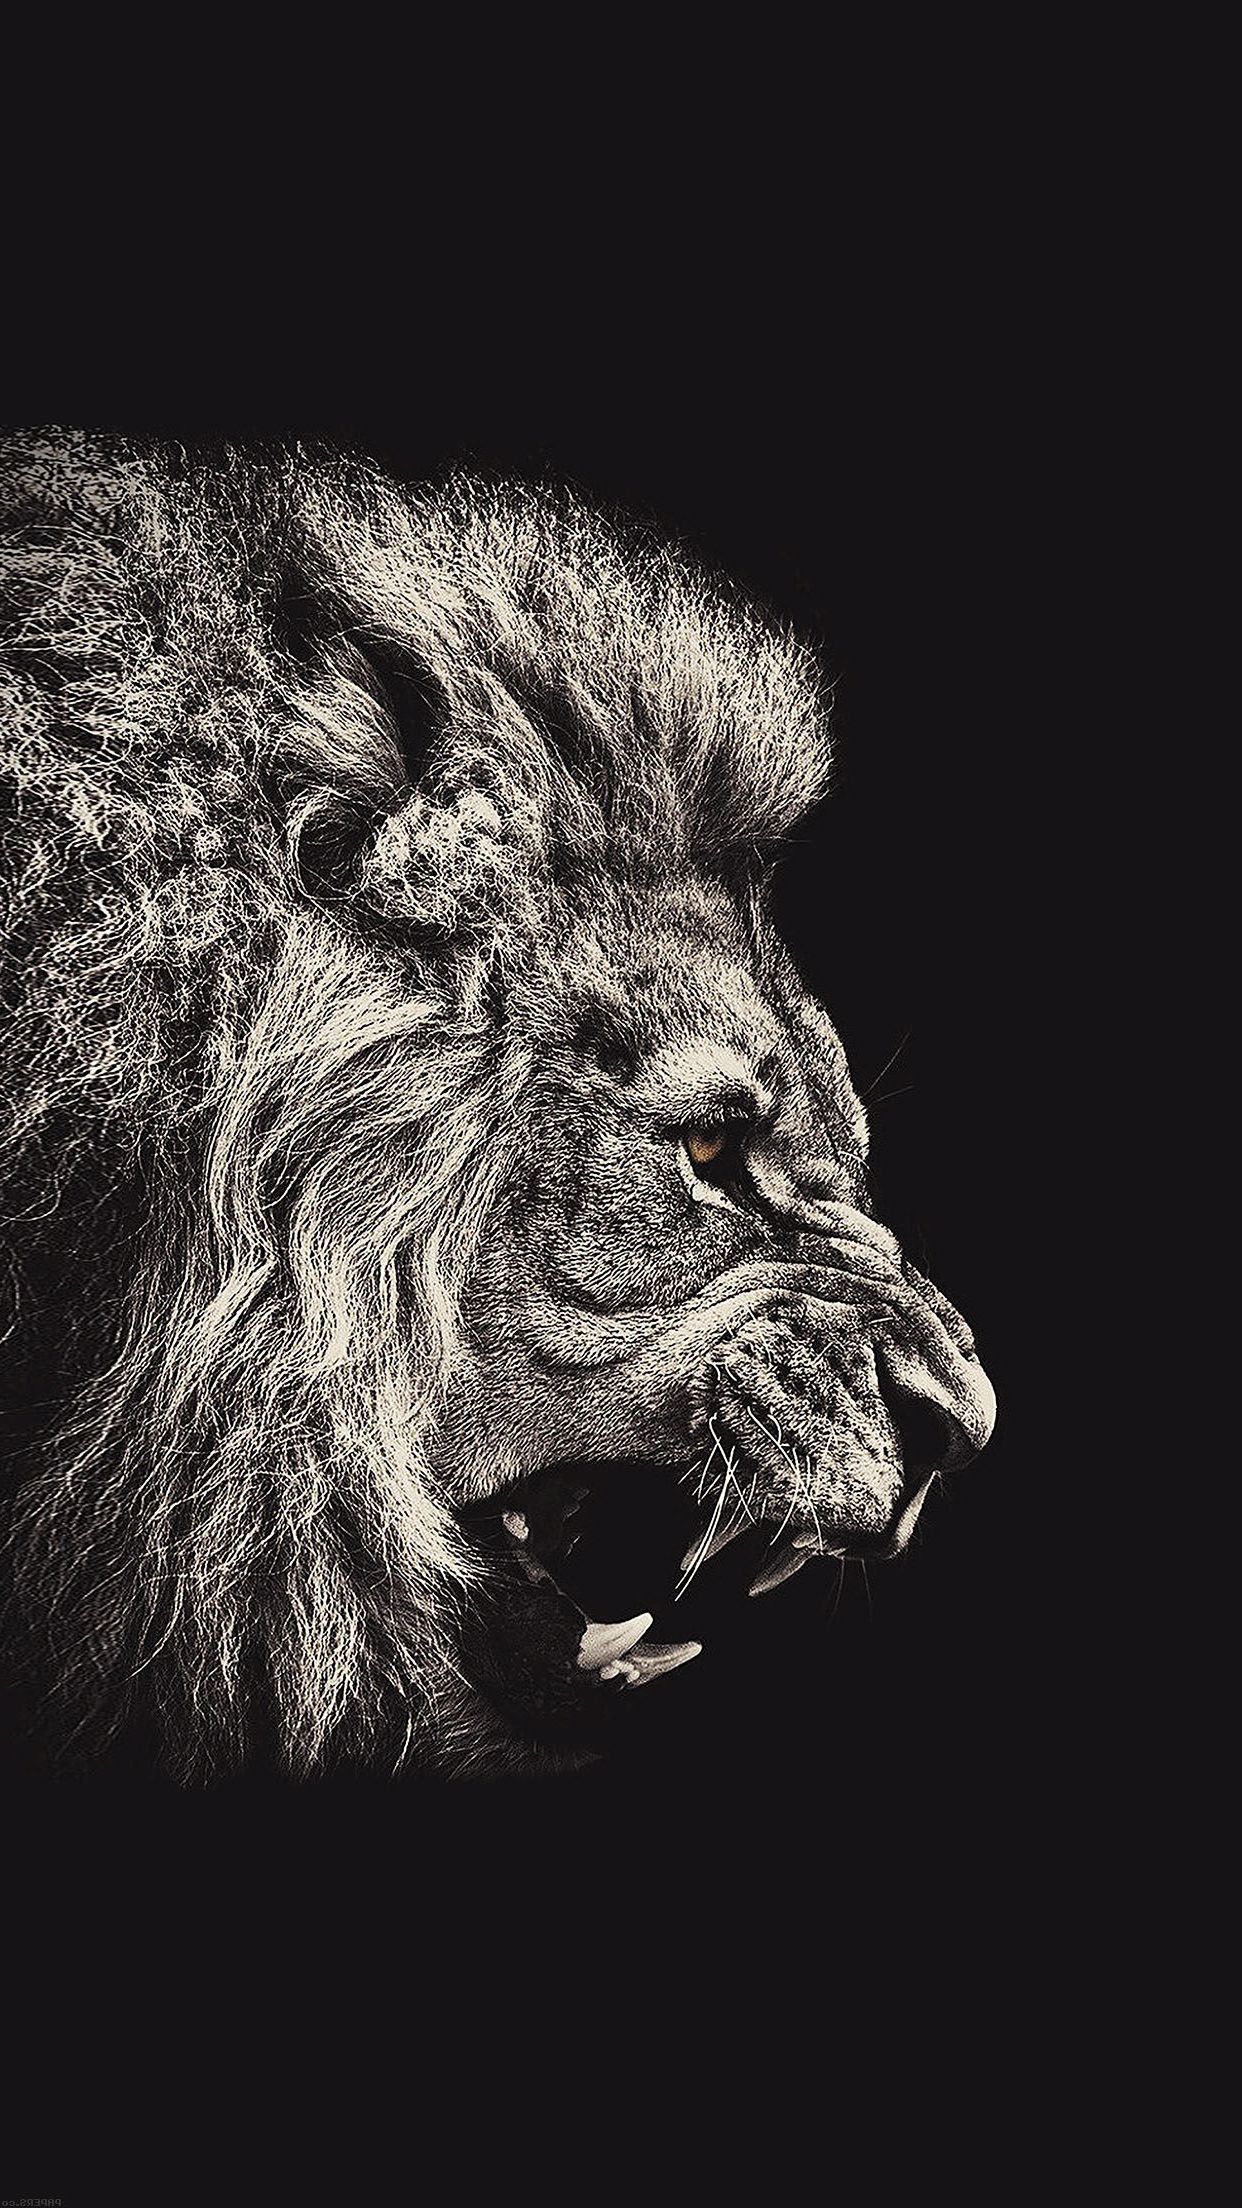 hd wallpapers for iphone 7,lion,felidae,black and white,wildlife,big cats